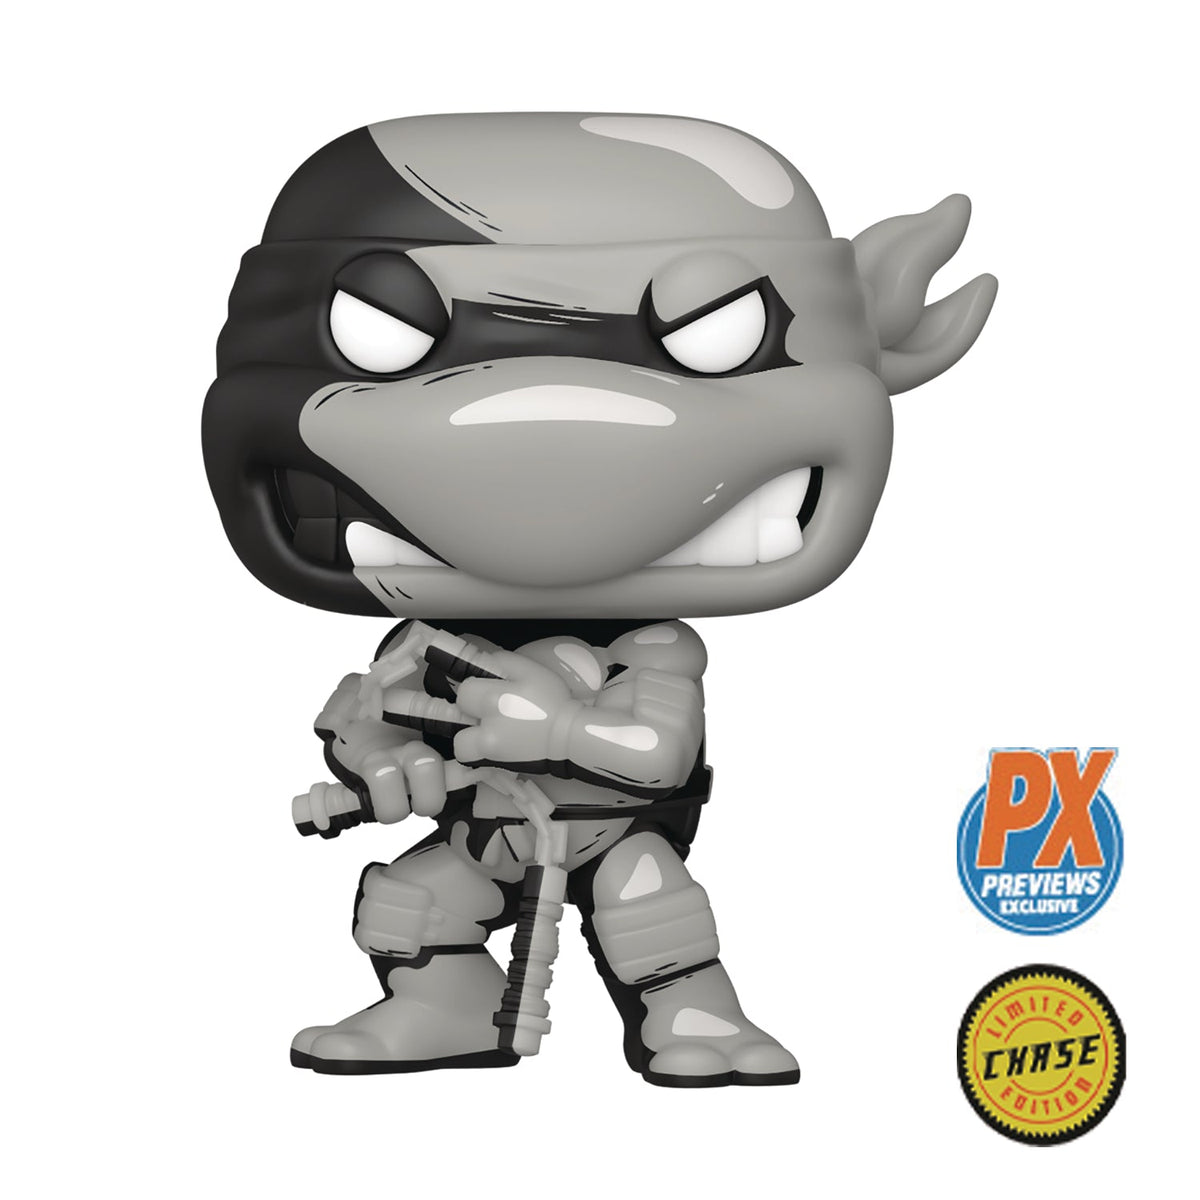 TMNT: Michelangelo (Chaser) PX Exclusive POP! Comics Toy Figure by Funko